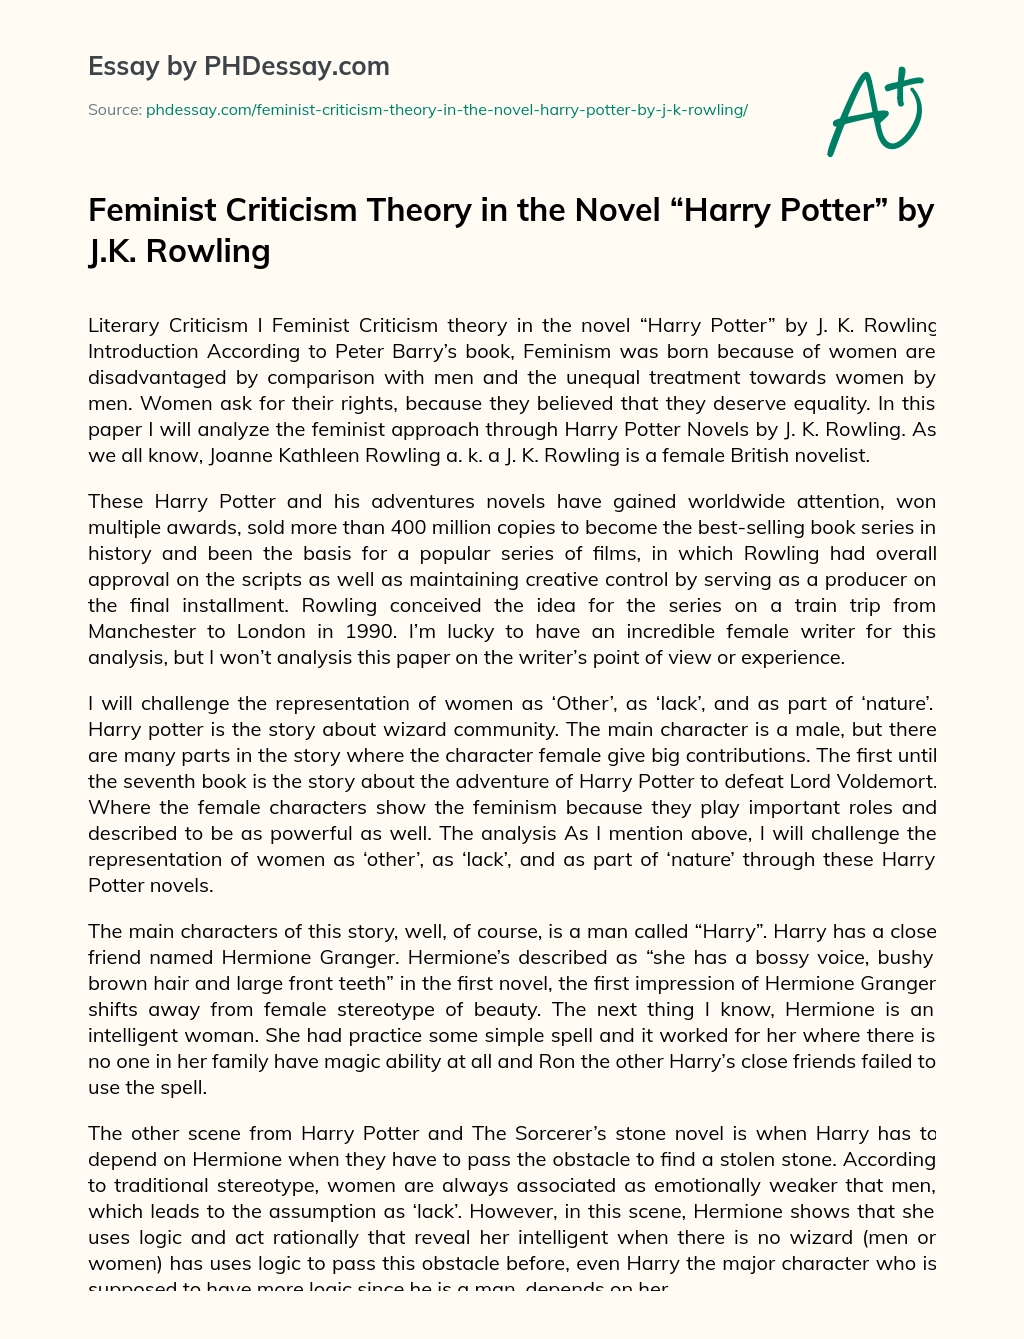 Feminist Criticism Theory in the Novel “Harry Potter” by J.K.